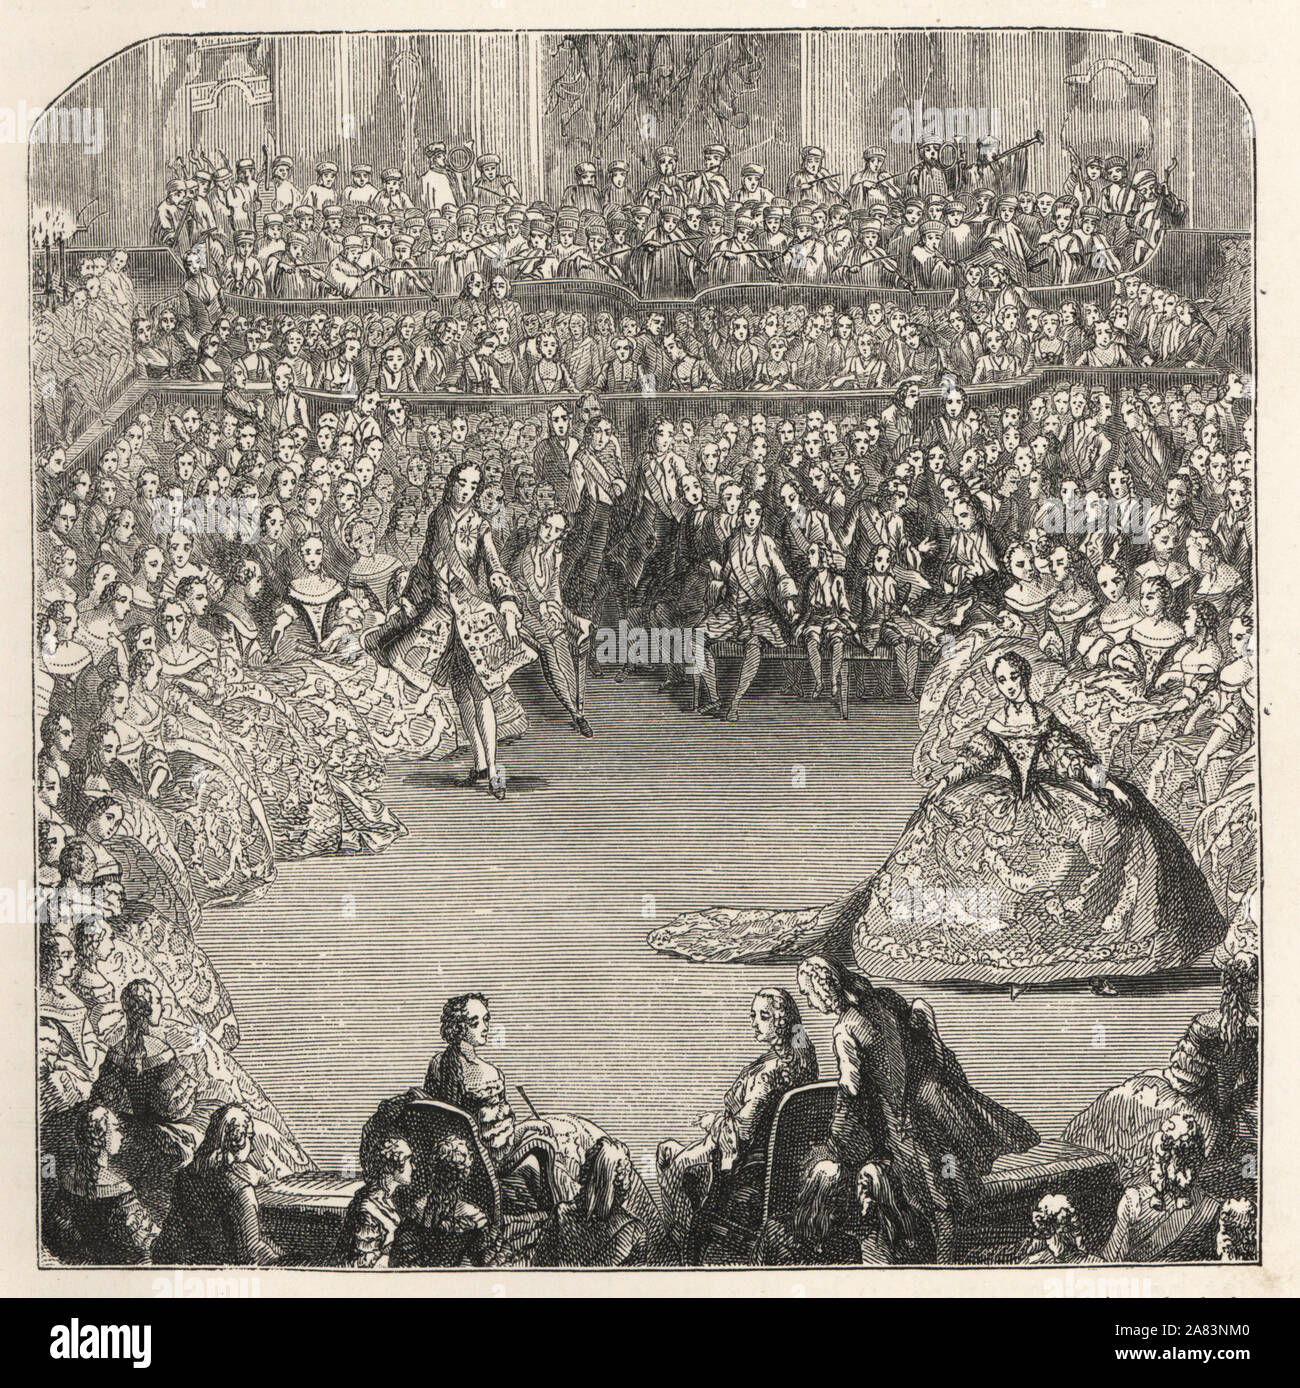 Minuet danced at the State Ball given by the French King, February 24th 1745, in the covered Riding School of the Grand Stables, Versailles. Lithograph after Charles Nicolas Cochin from Paul Lacroix' The Eighteenth Century: Its Institutions, Customs, and Costumes, London, 1876. Stock Photo